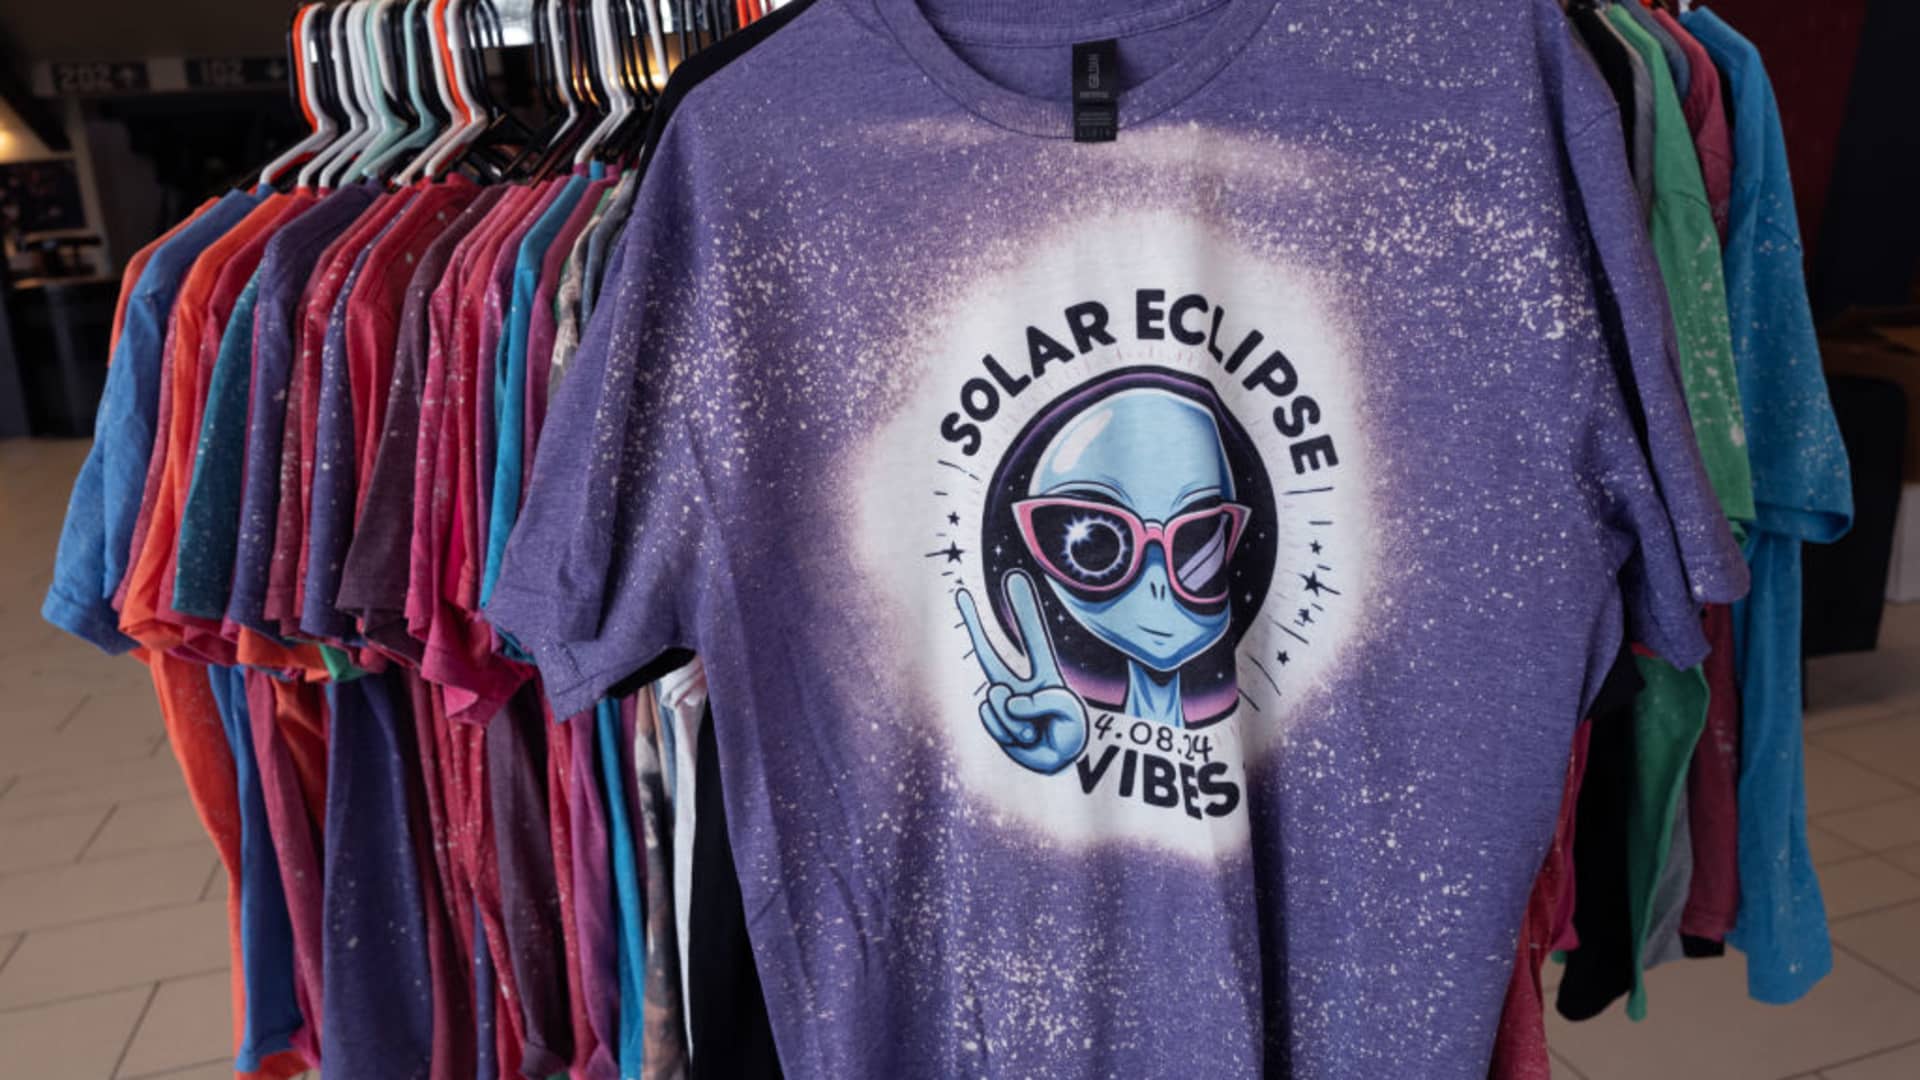 Eclipse-themed T-shirts are offered for sale at a science fair at Southern Illinois University on April 07, 2024 in Carbondale, Illinois. 